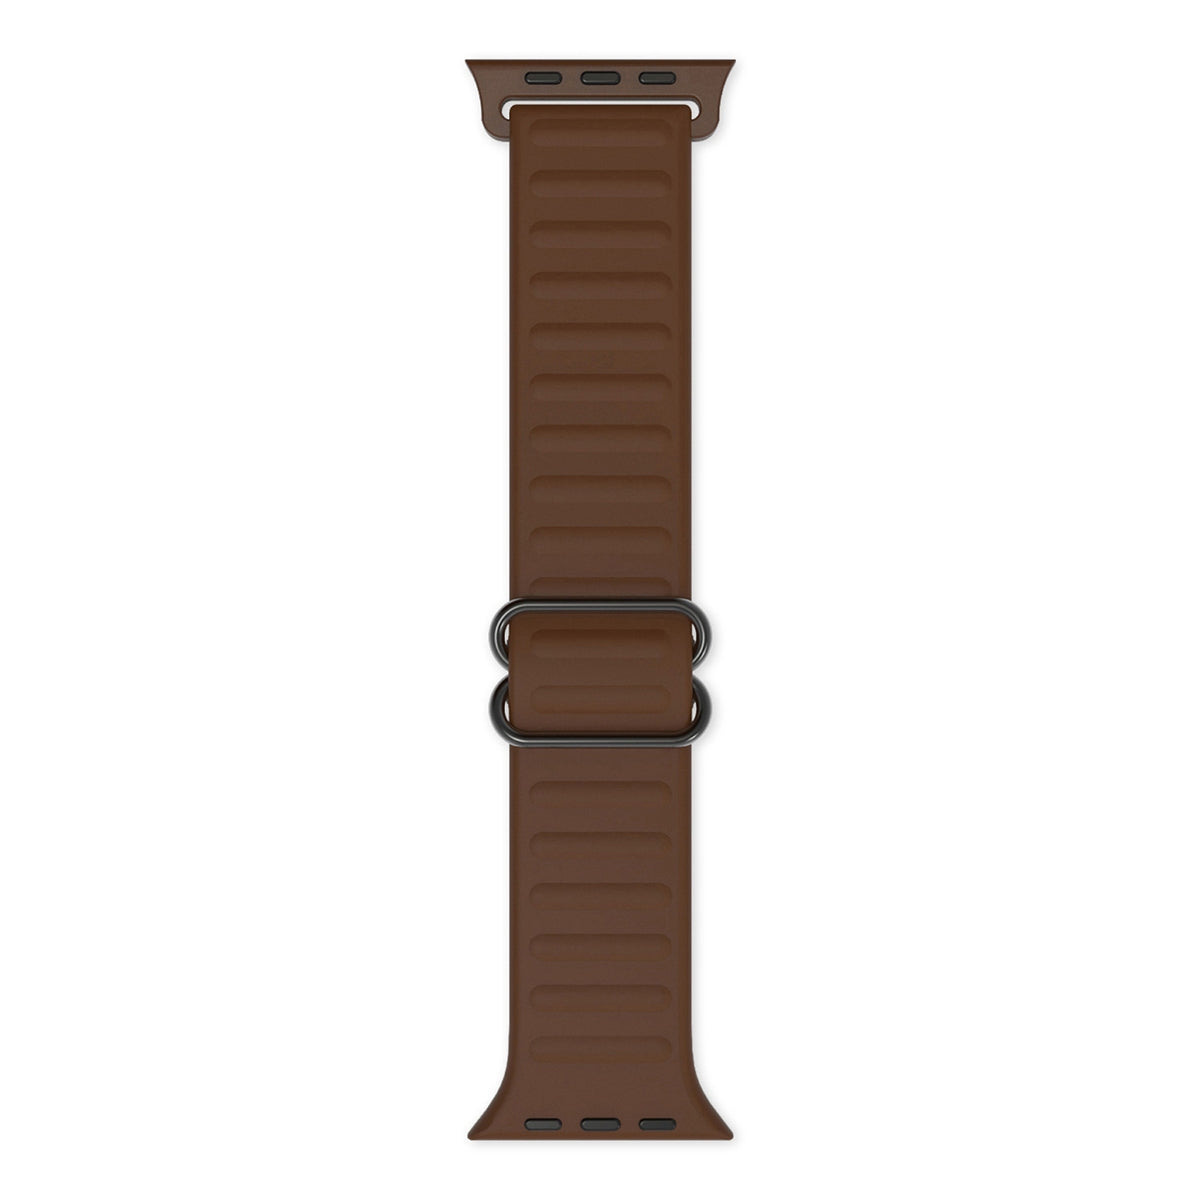 Solid Coffee Brown Apple Watch Strap